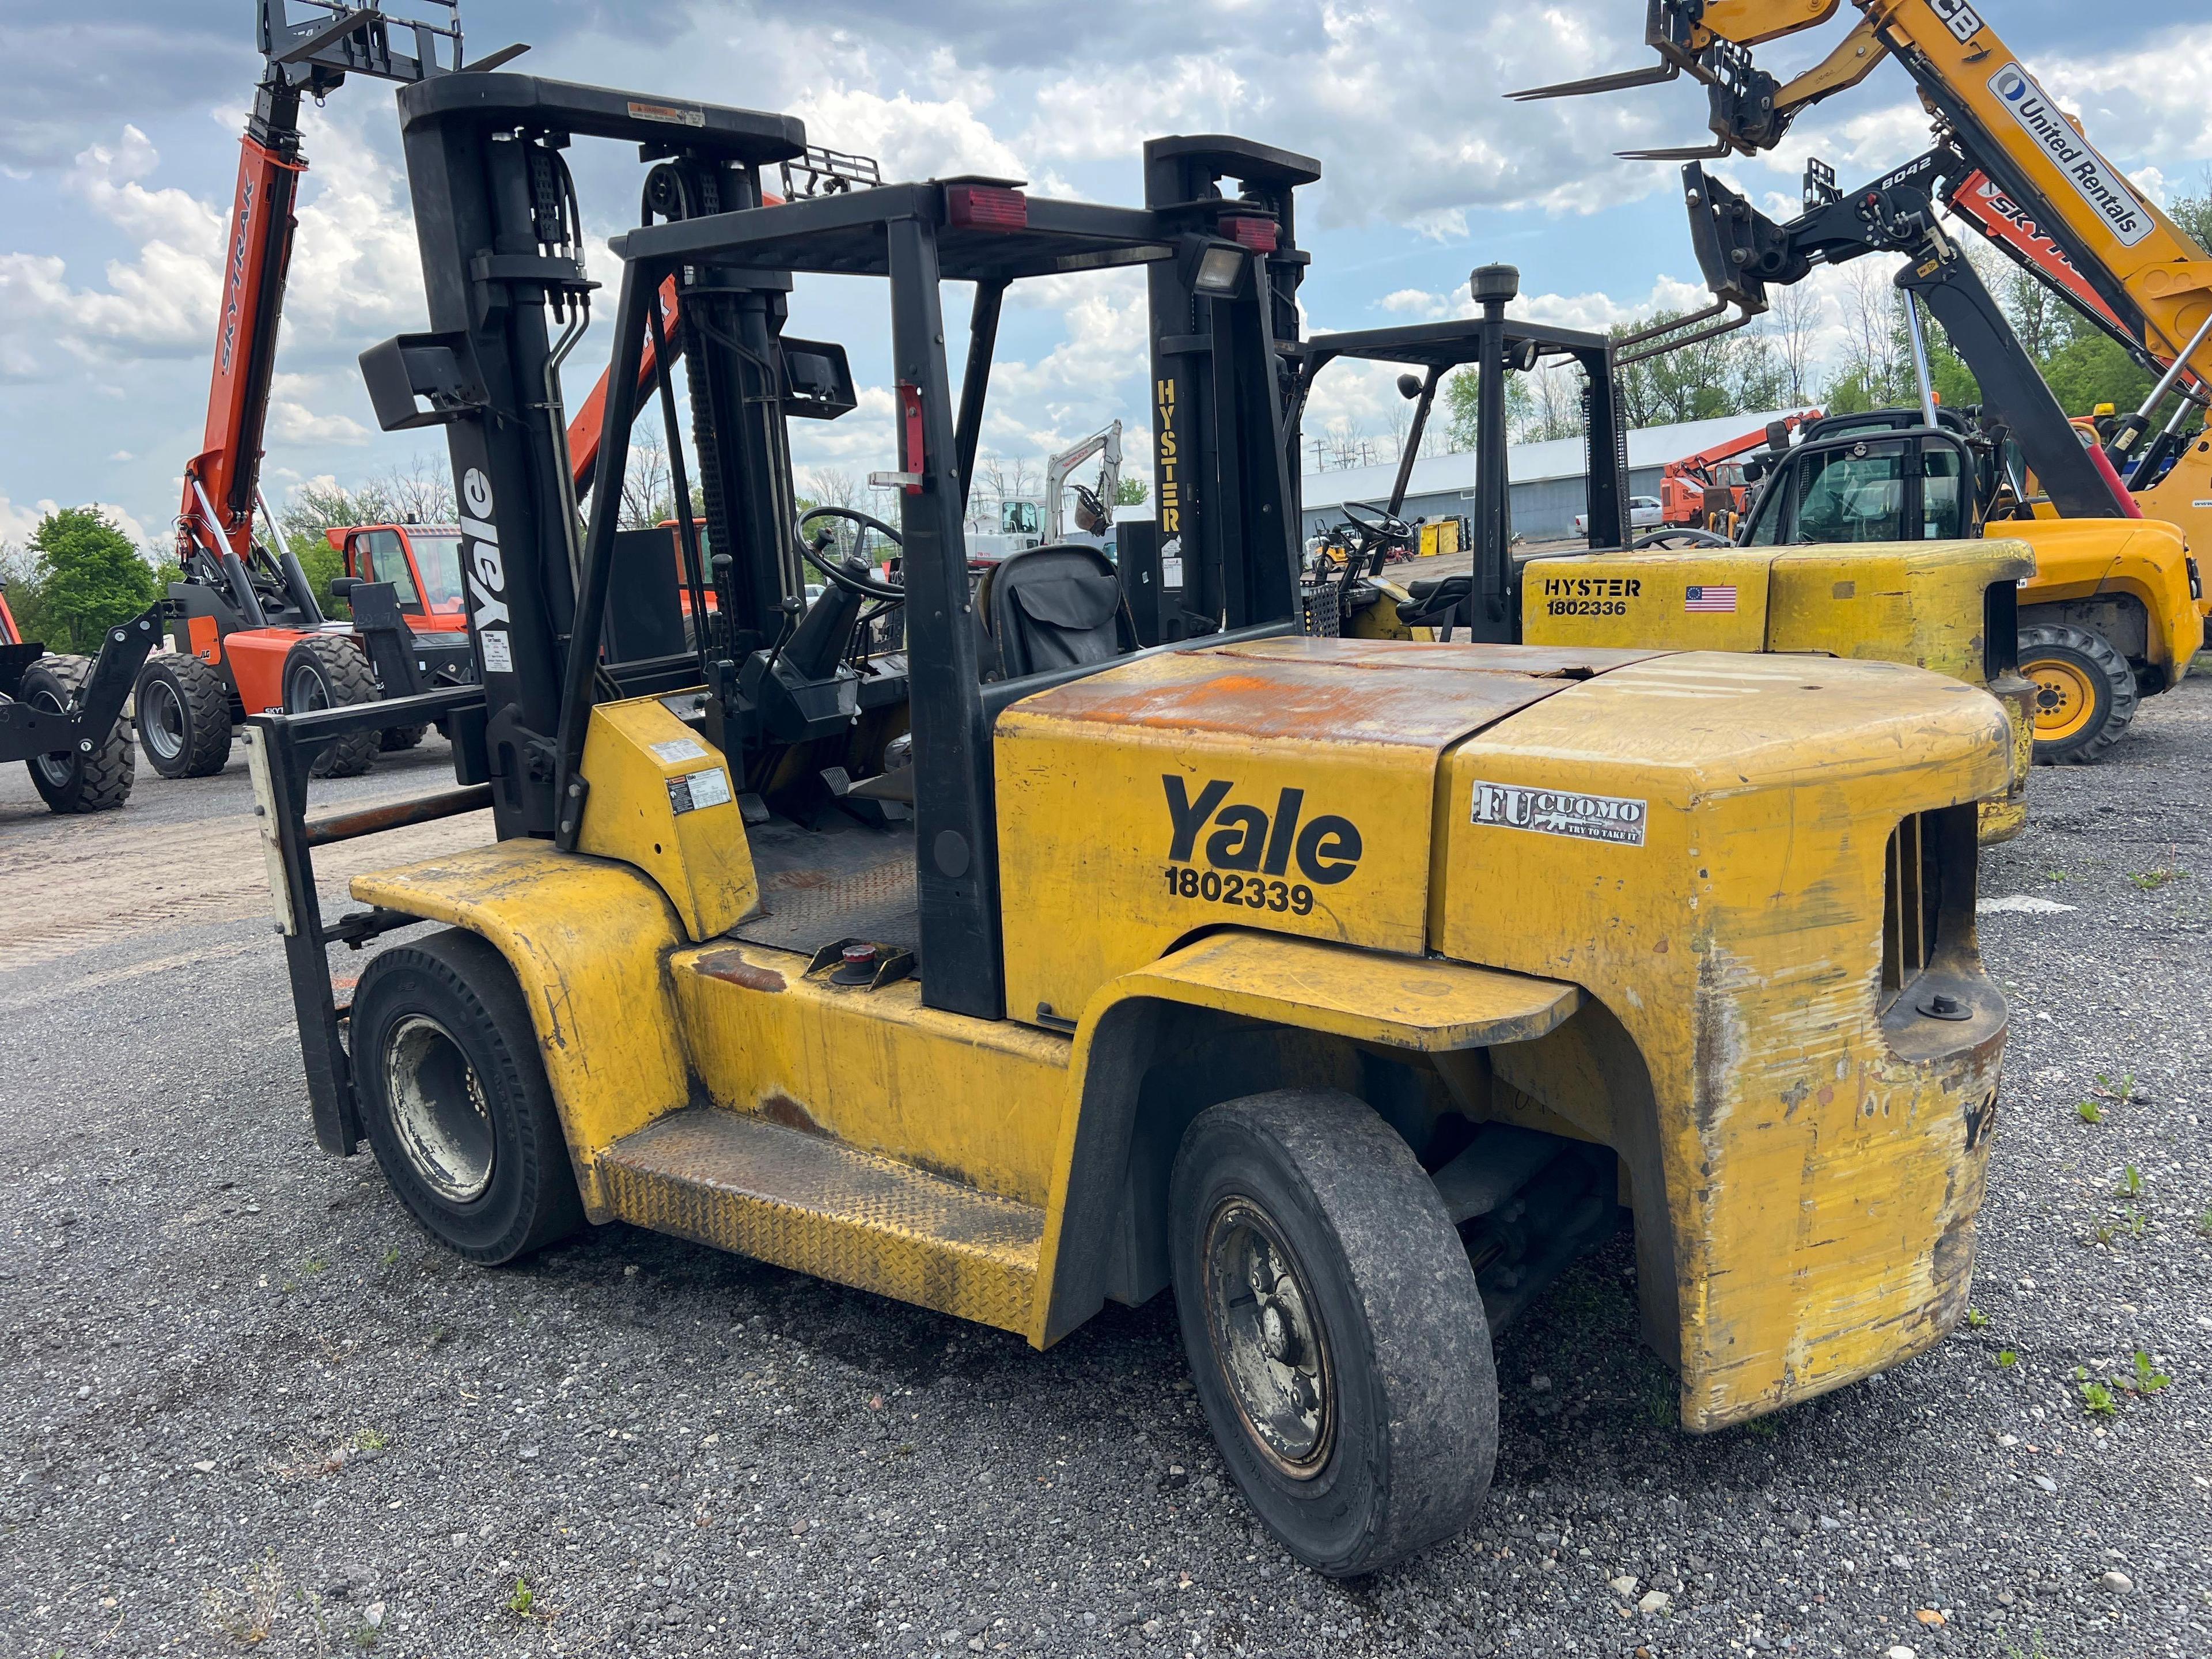 YALE GDP135 FORKLIFT SN:2308D powered by diesel engine, equipped with OROPS, 13,500lb lift capacity.